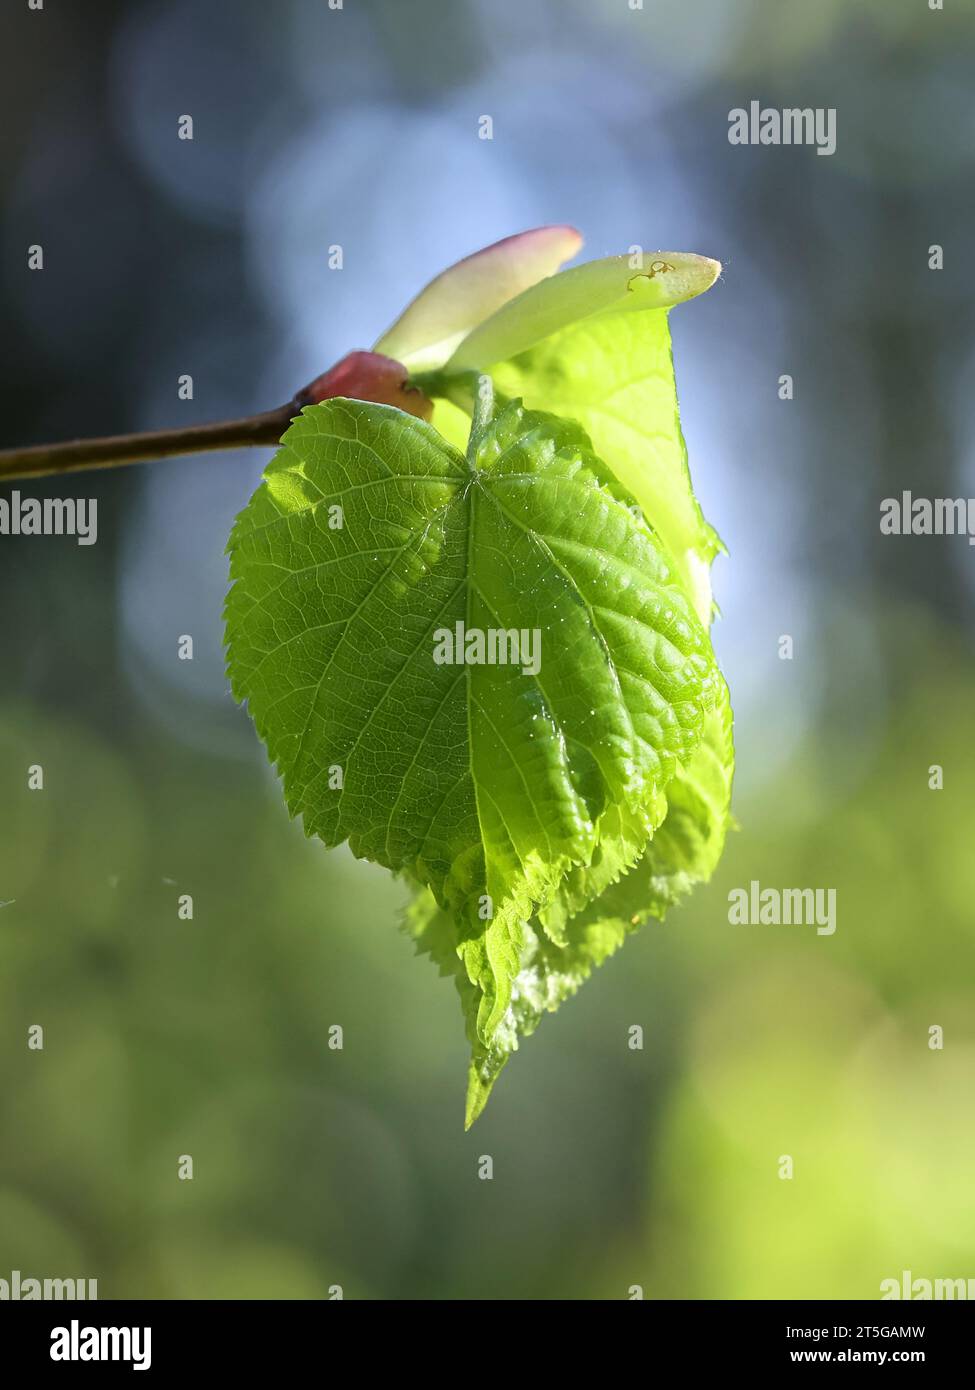 Tilia cordata, known as Small-leaved Lime, Small-leaved Linden or Little-leaf Linden, fresh leaves in spring Stock Photo